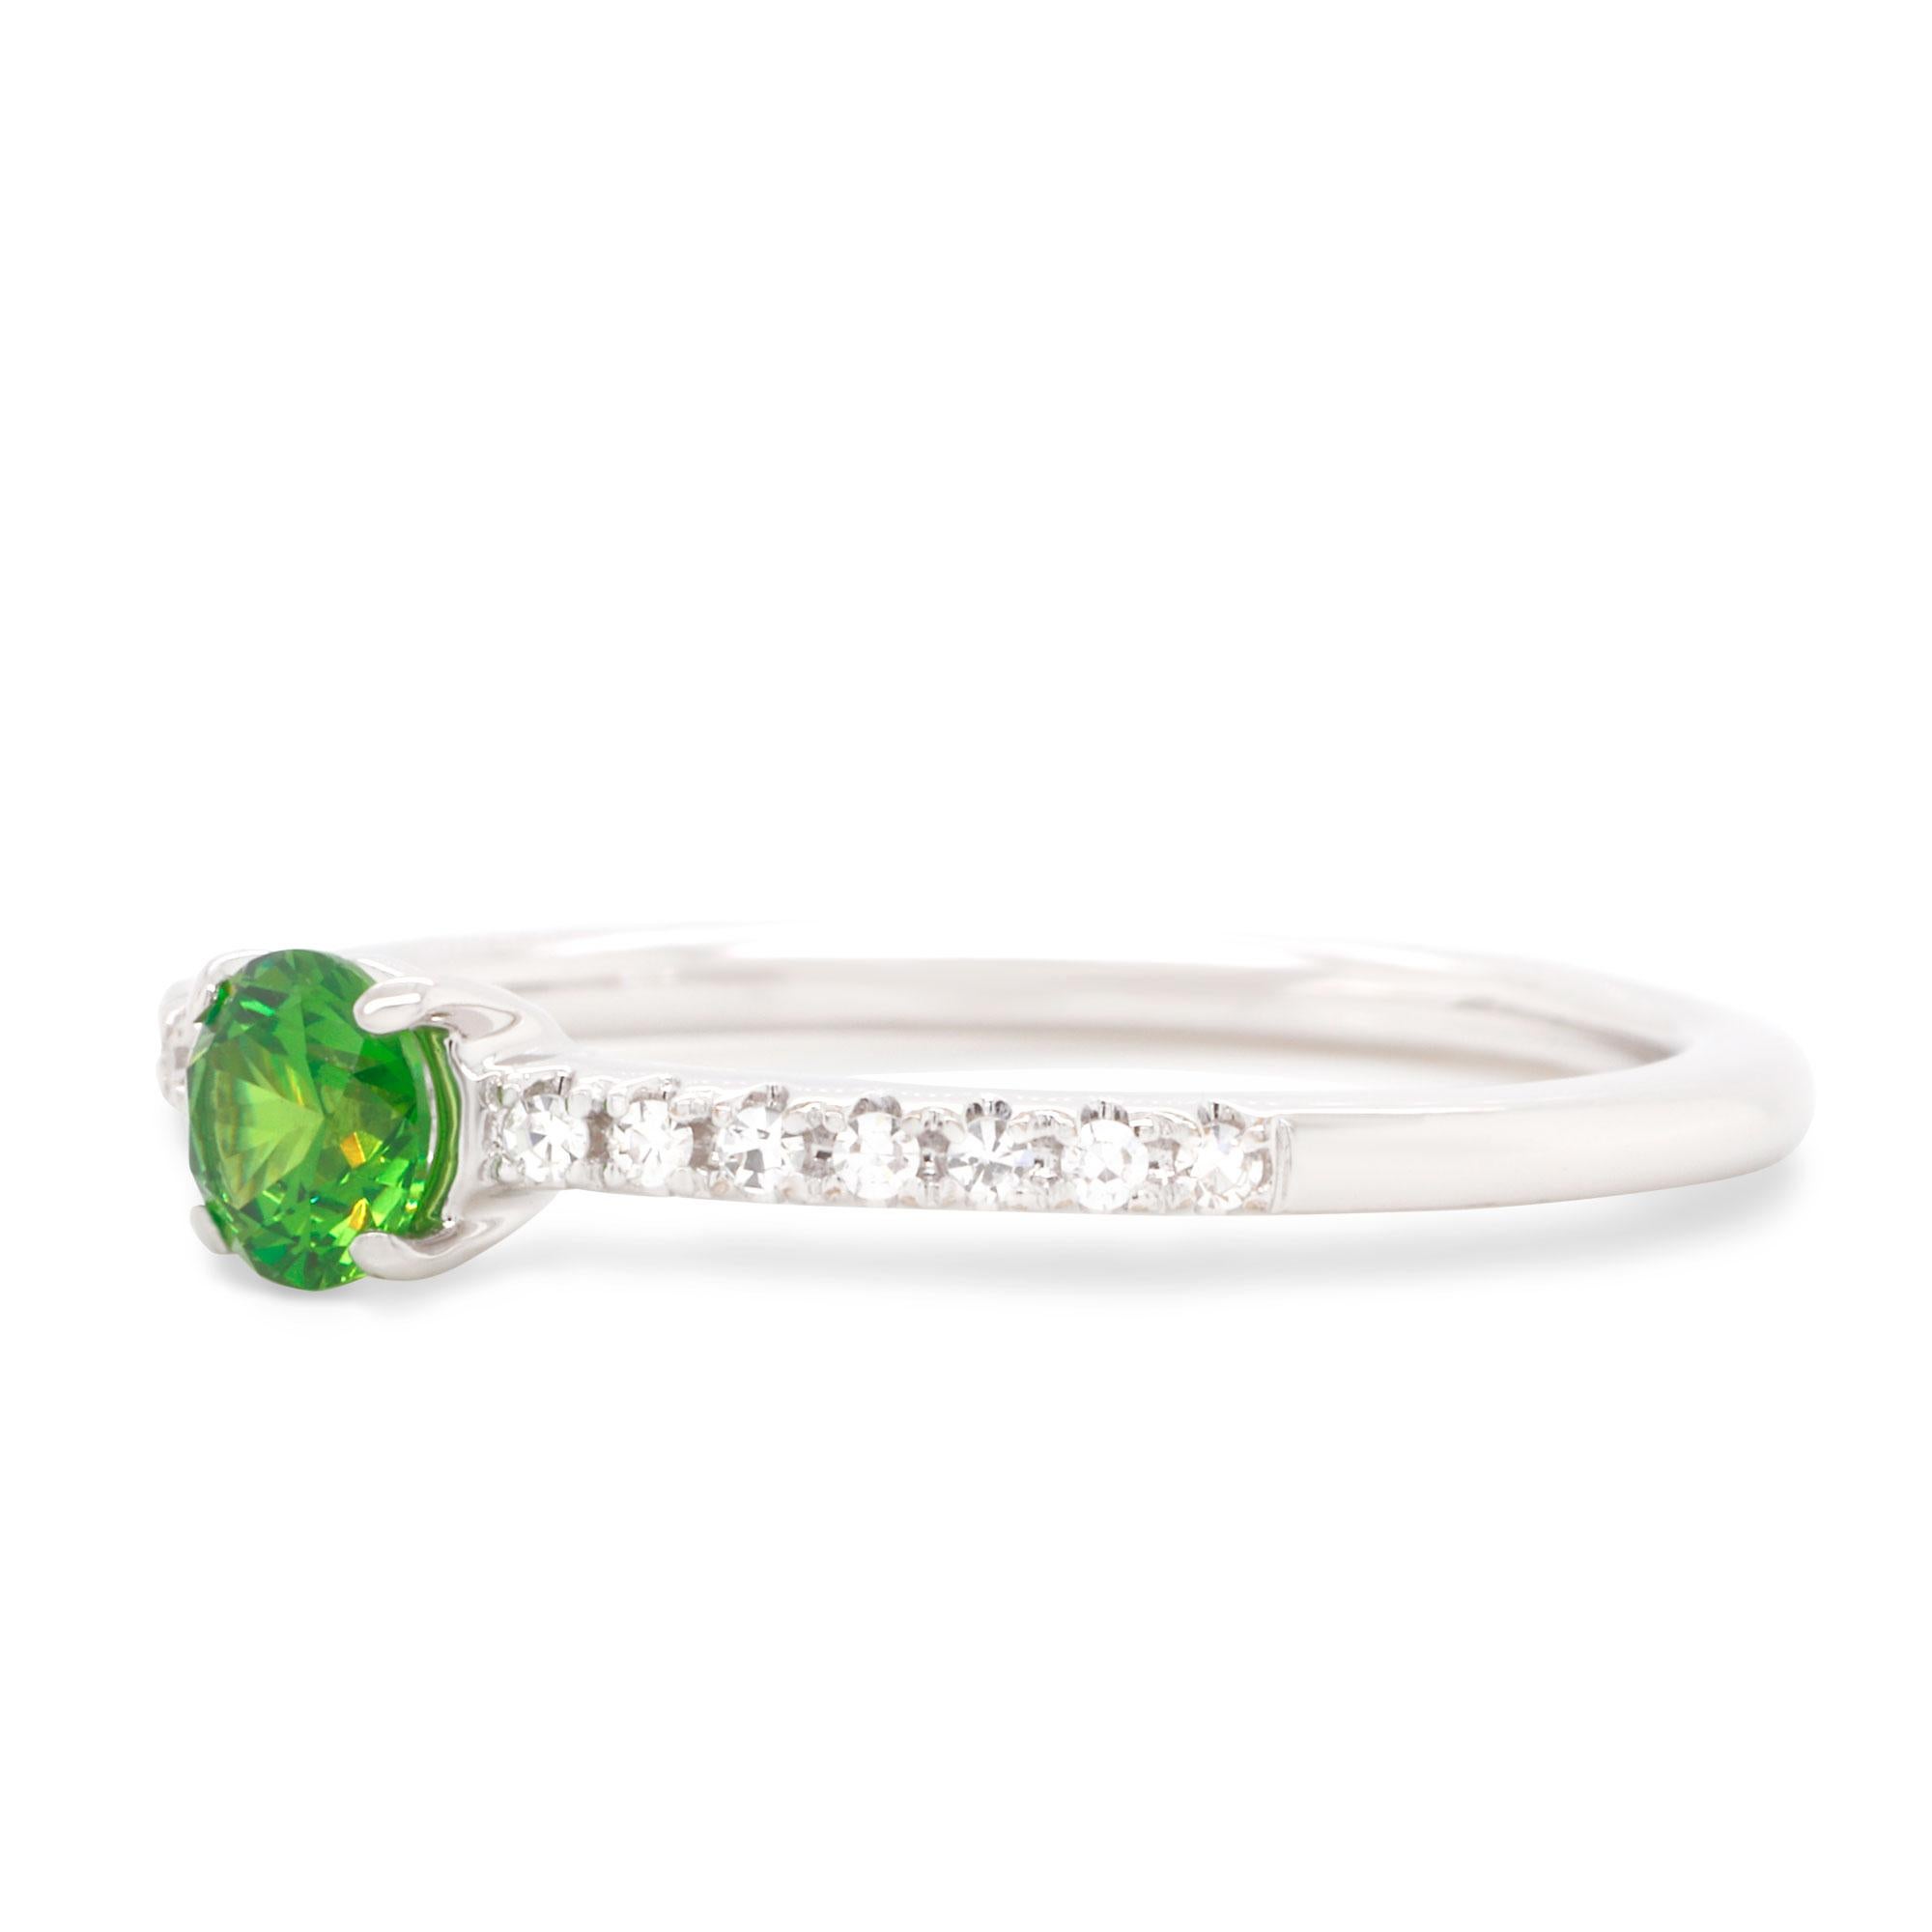 Wonderful 14K White Gold Ring. Center stone is a unique Russian Demantoid 0.31 ct, accented by white Diamonds 0.064 ctw. Simple but yet elegant design makes this ring perfect for any occasion. You can wear it everyday to emphasize your style, it can